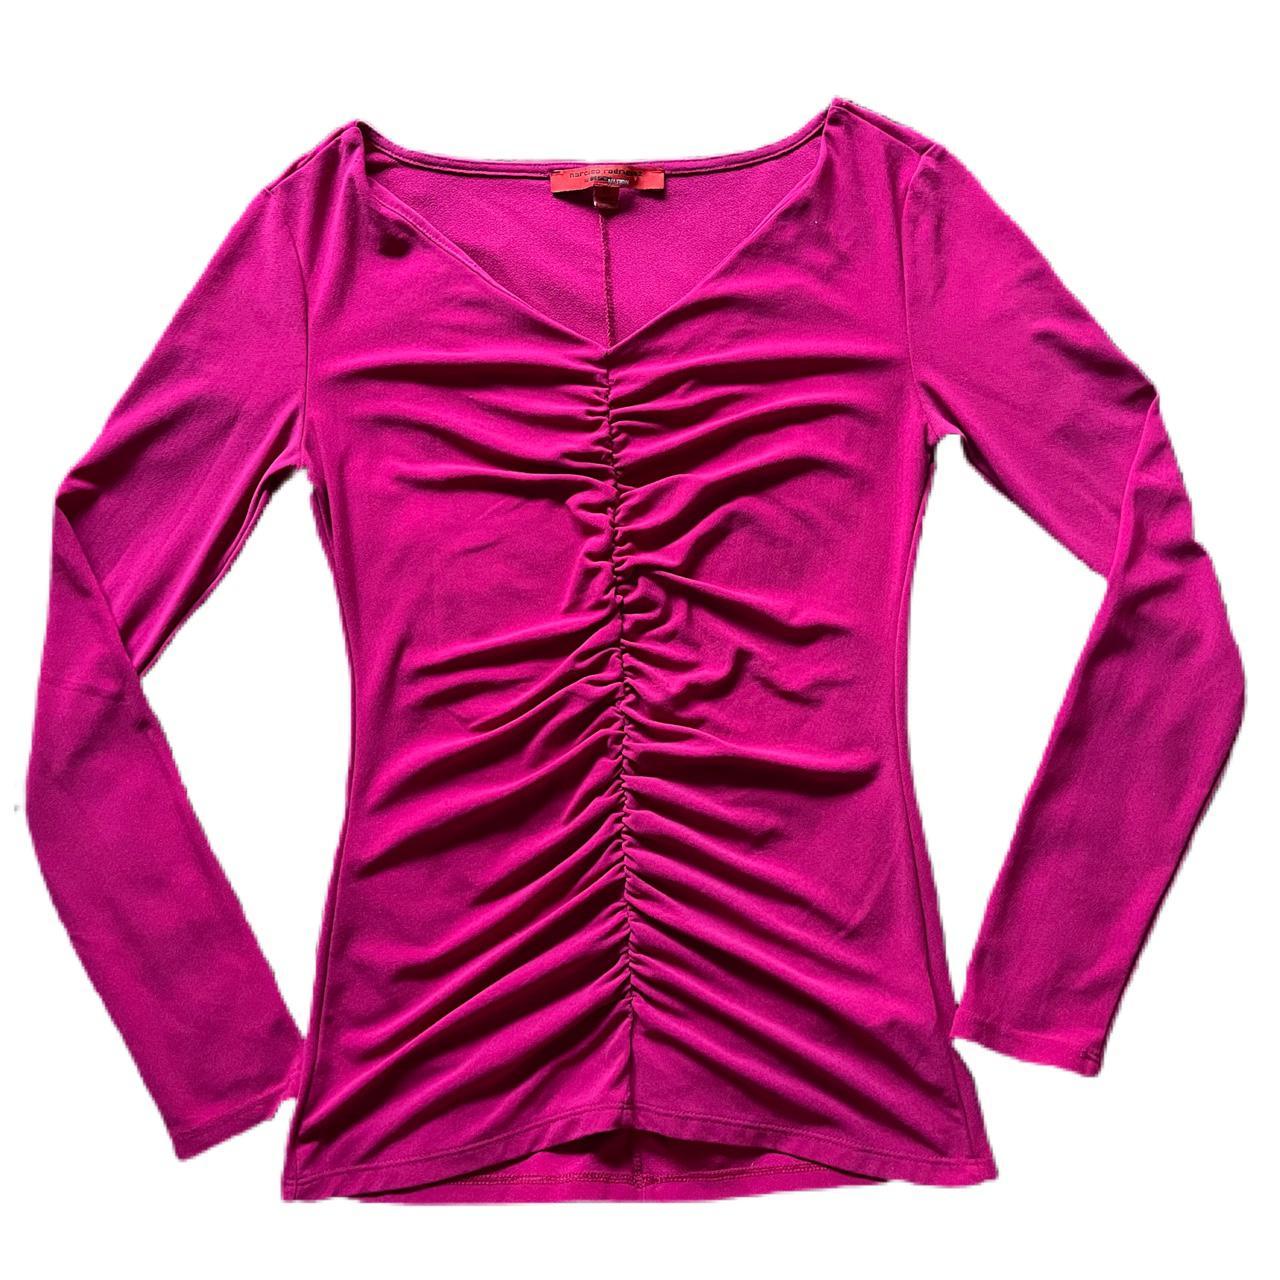 Product Image 1 - Gorgeous bright fuchsia pink Narciso